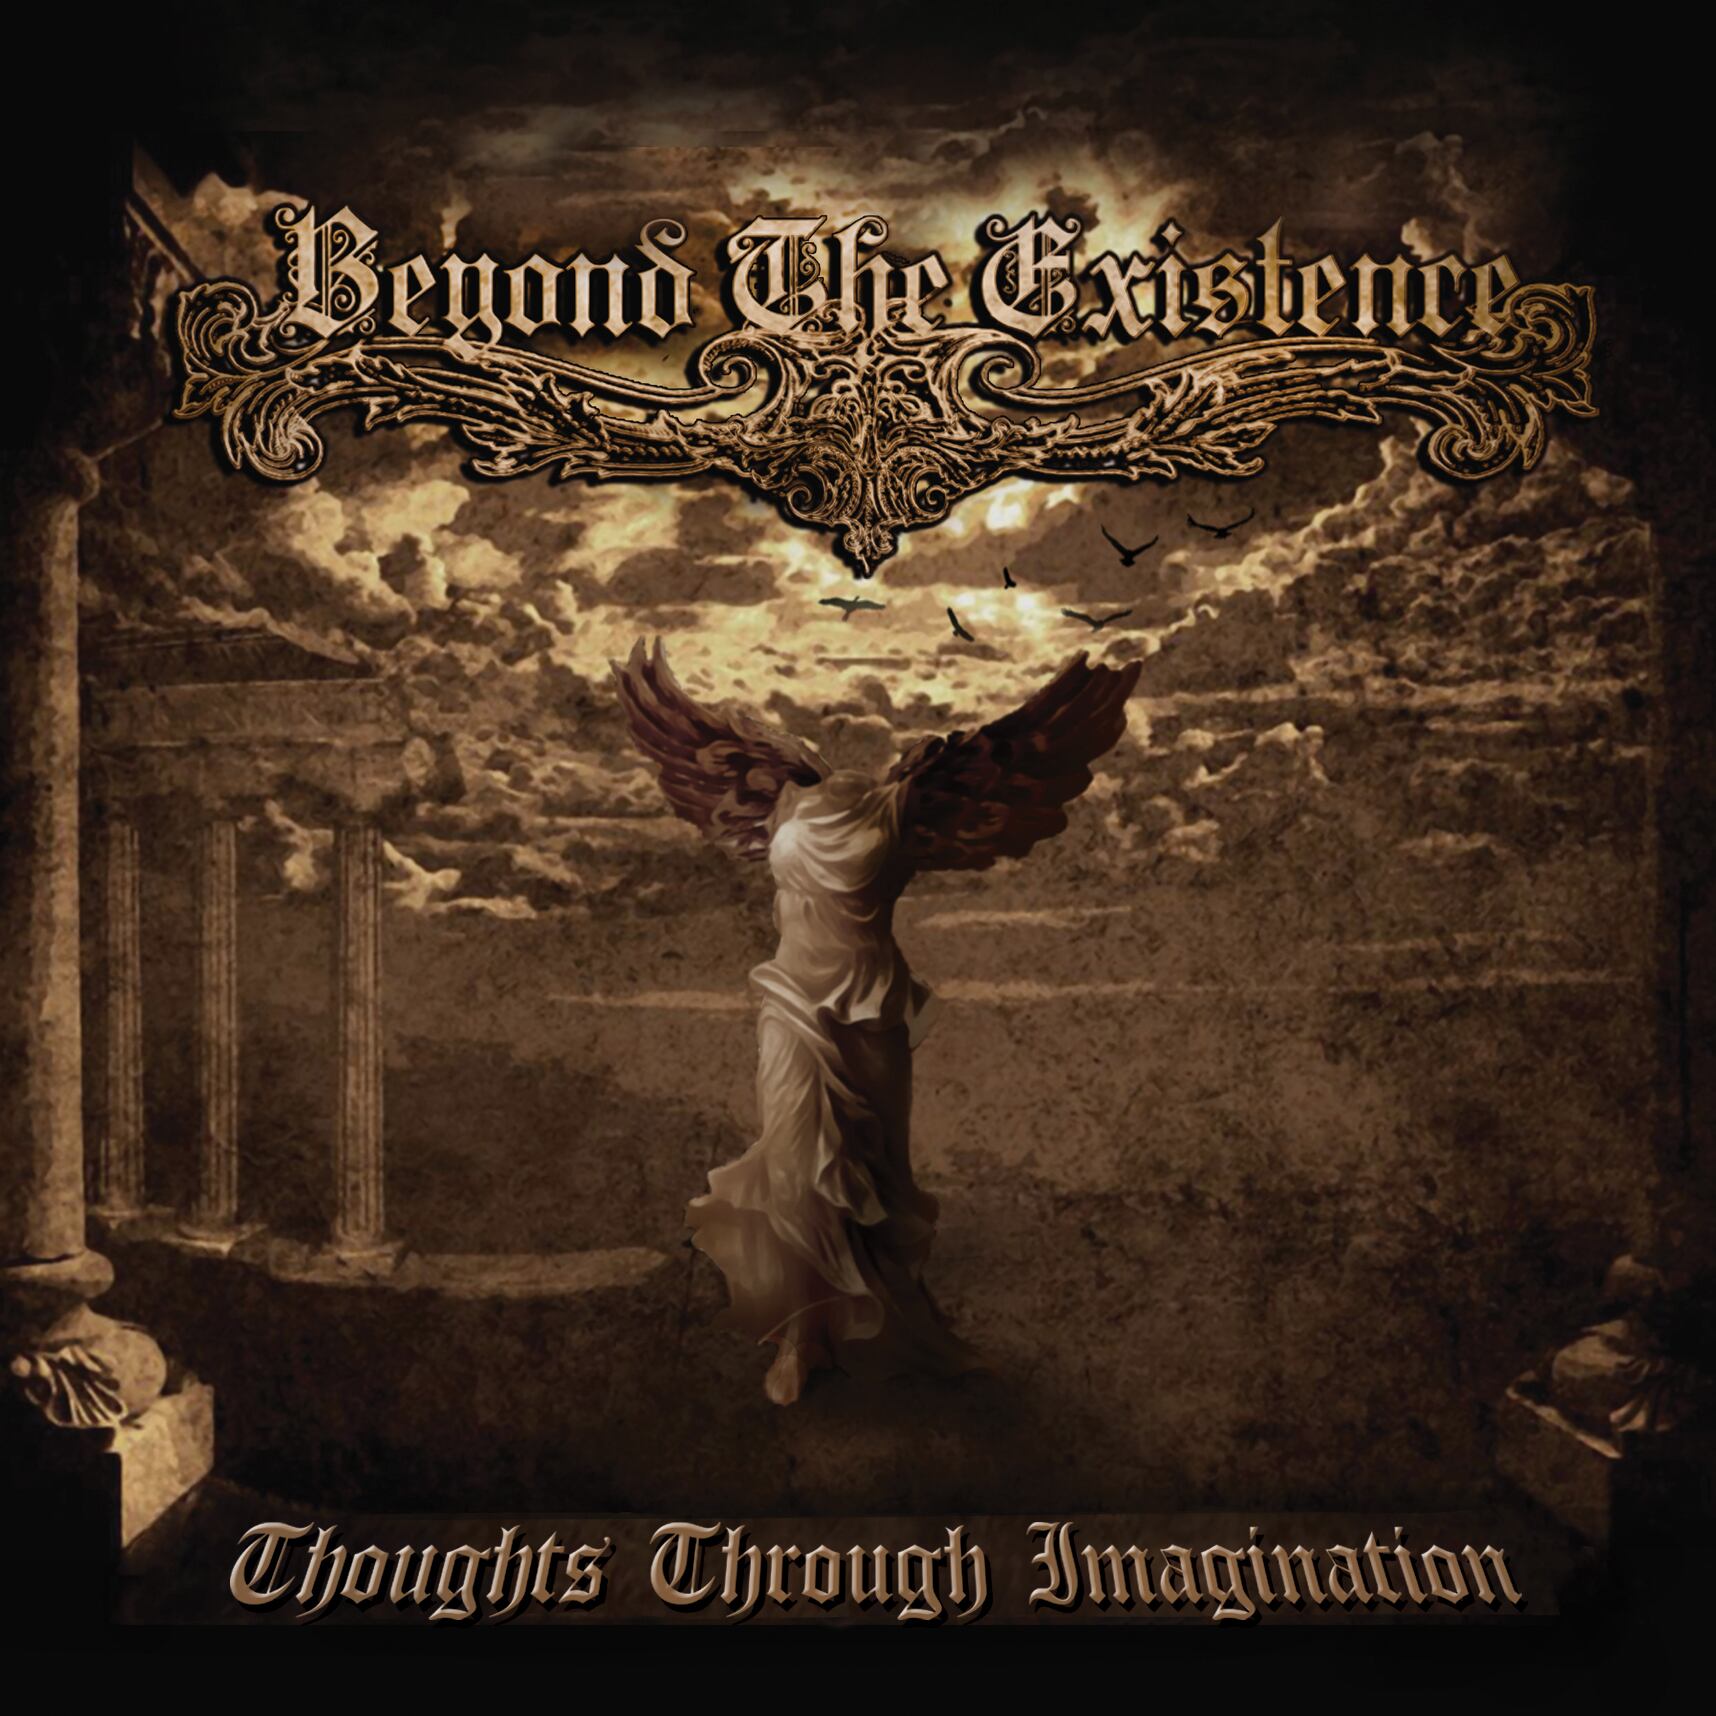 [IOSR CD 013] BEYOND THE EXISTENCE 『Thoughts Through Imagination』